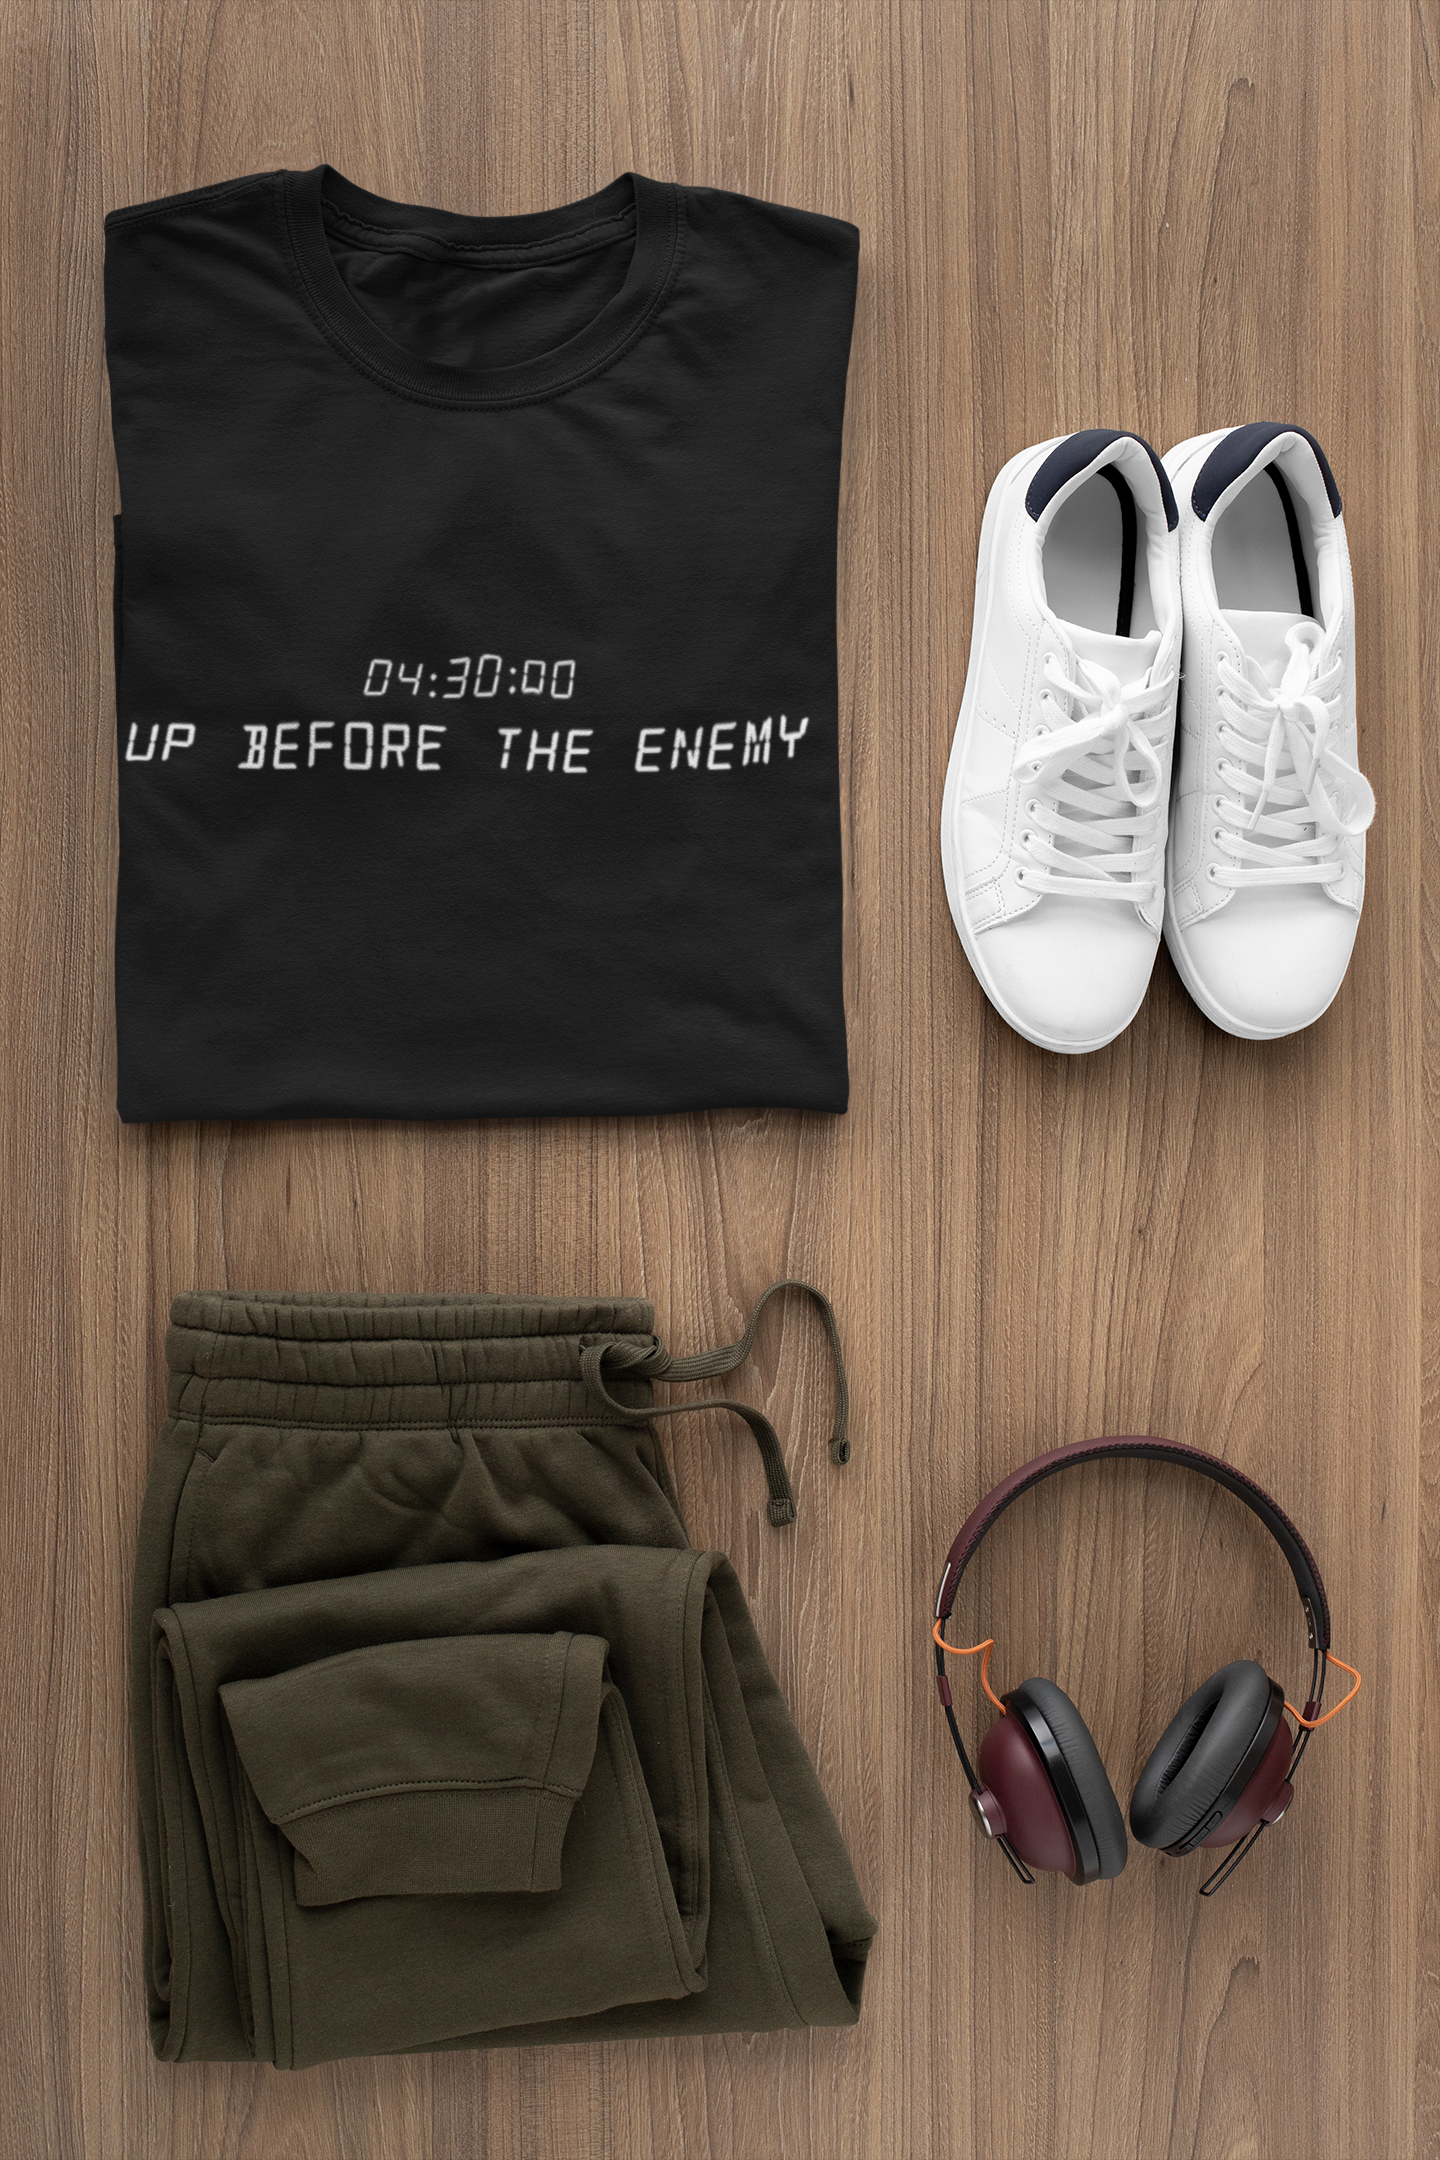 430AM Up Before The Enemy - Jocko Willink Inspired Navy Seal Army Graphic T Shirt with Quote